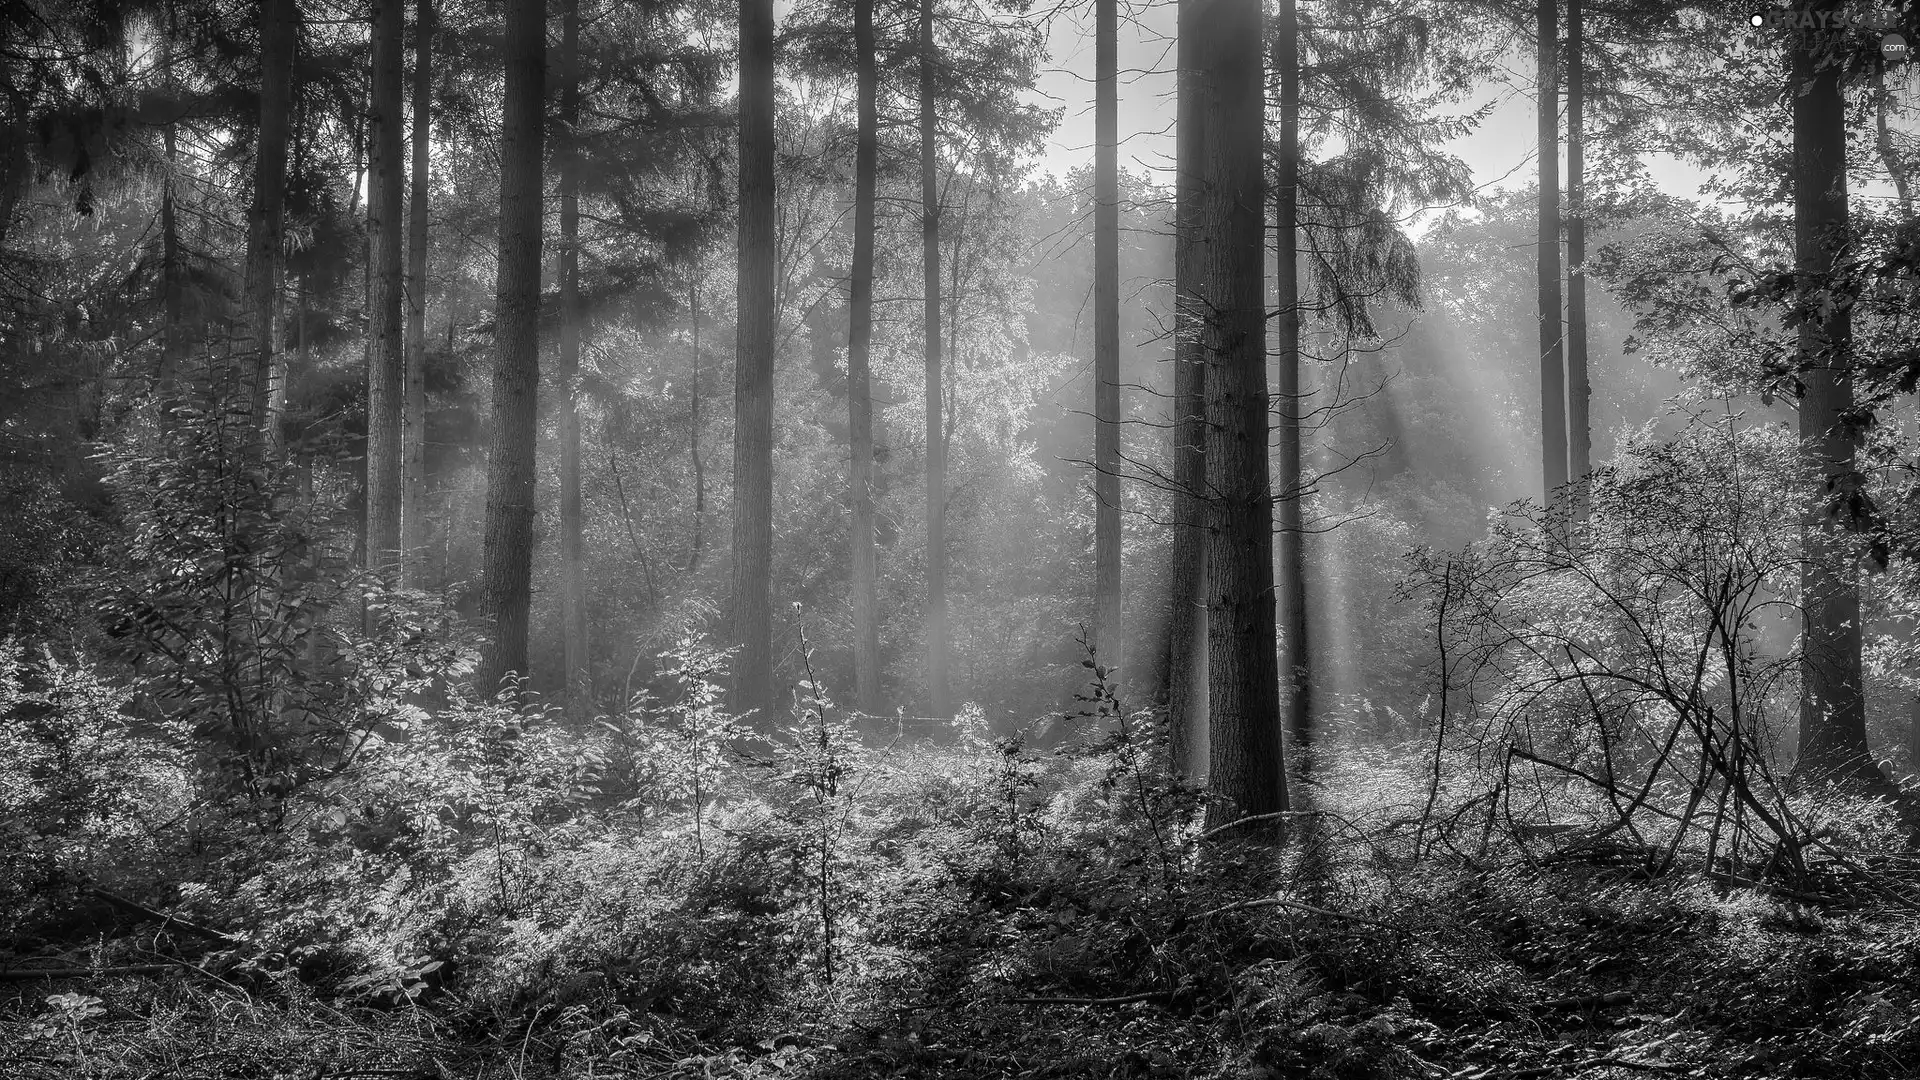 light breaking through sky, Plants, trees, viewes, forest